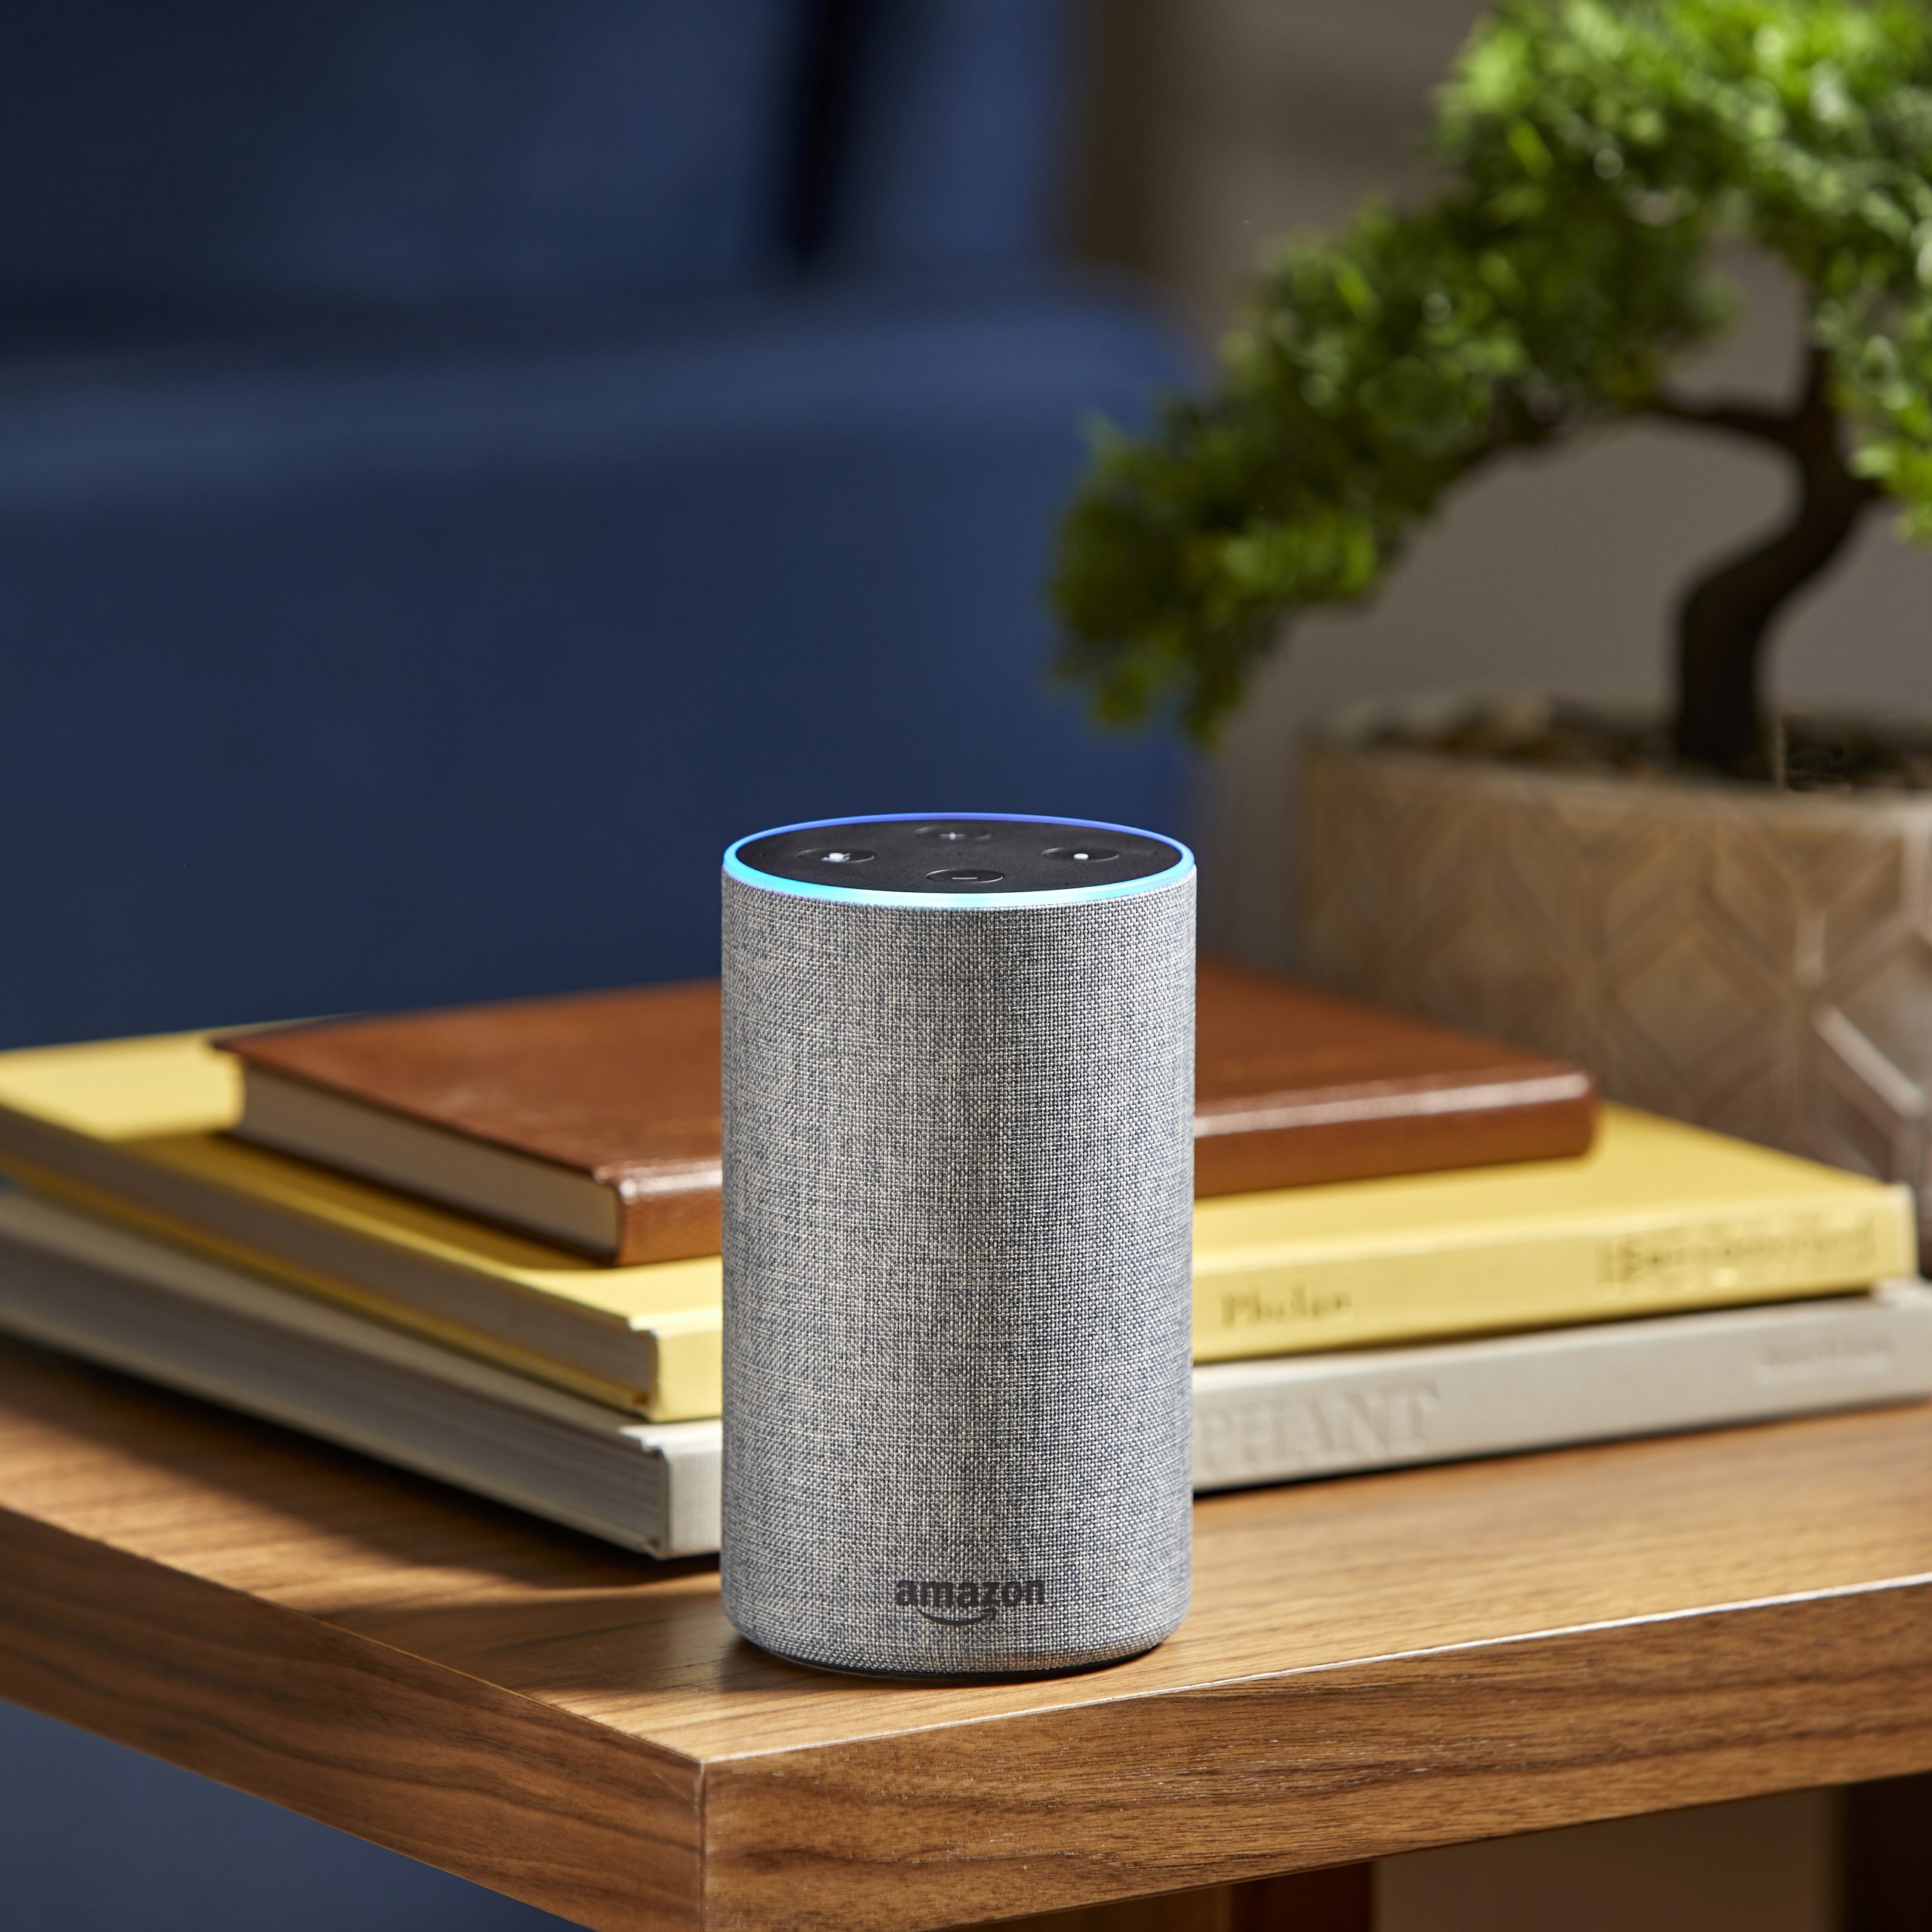 Do Amazon Echo's Security Features Really Work?